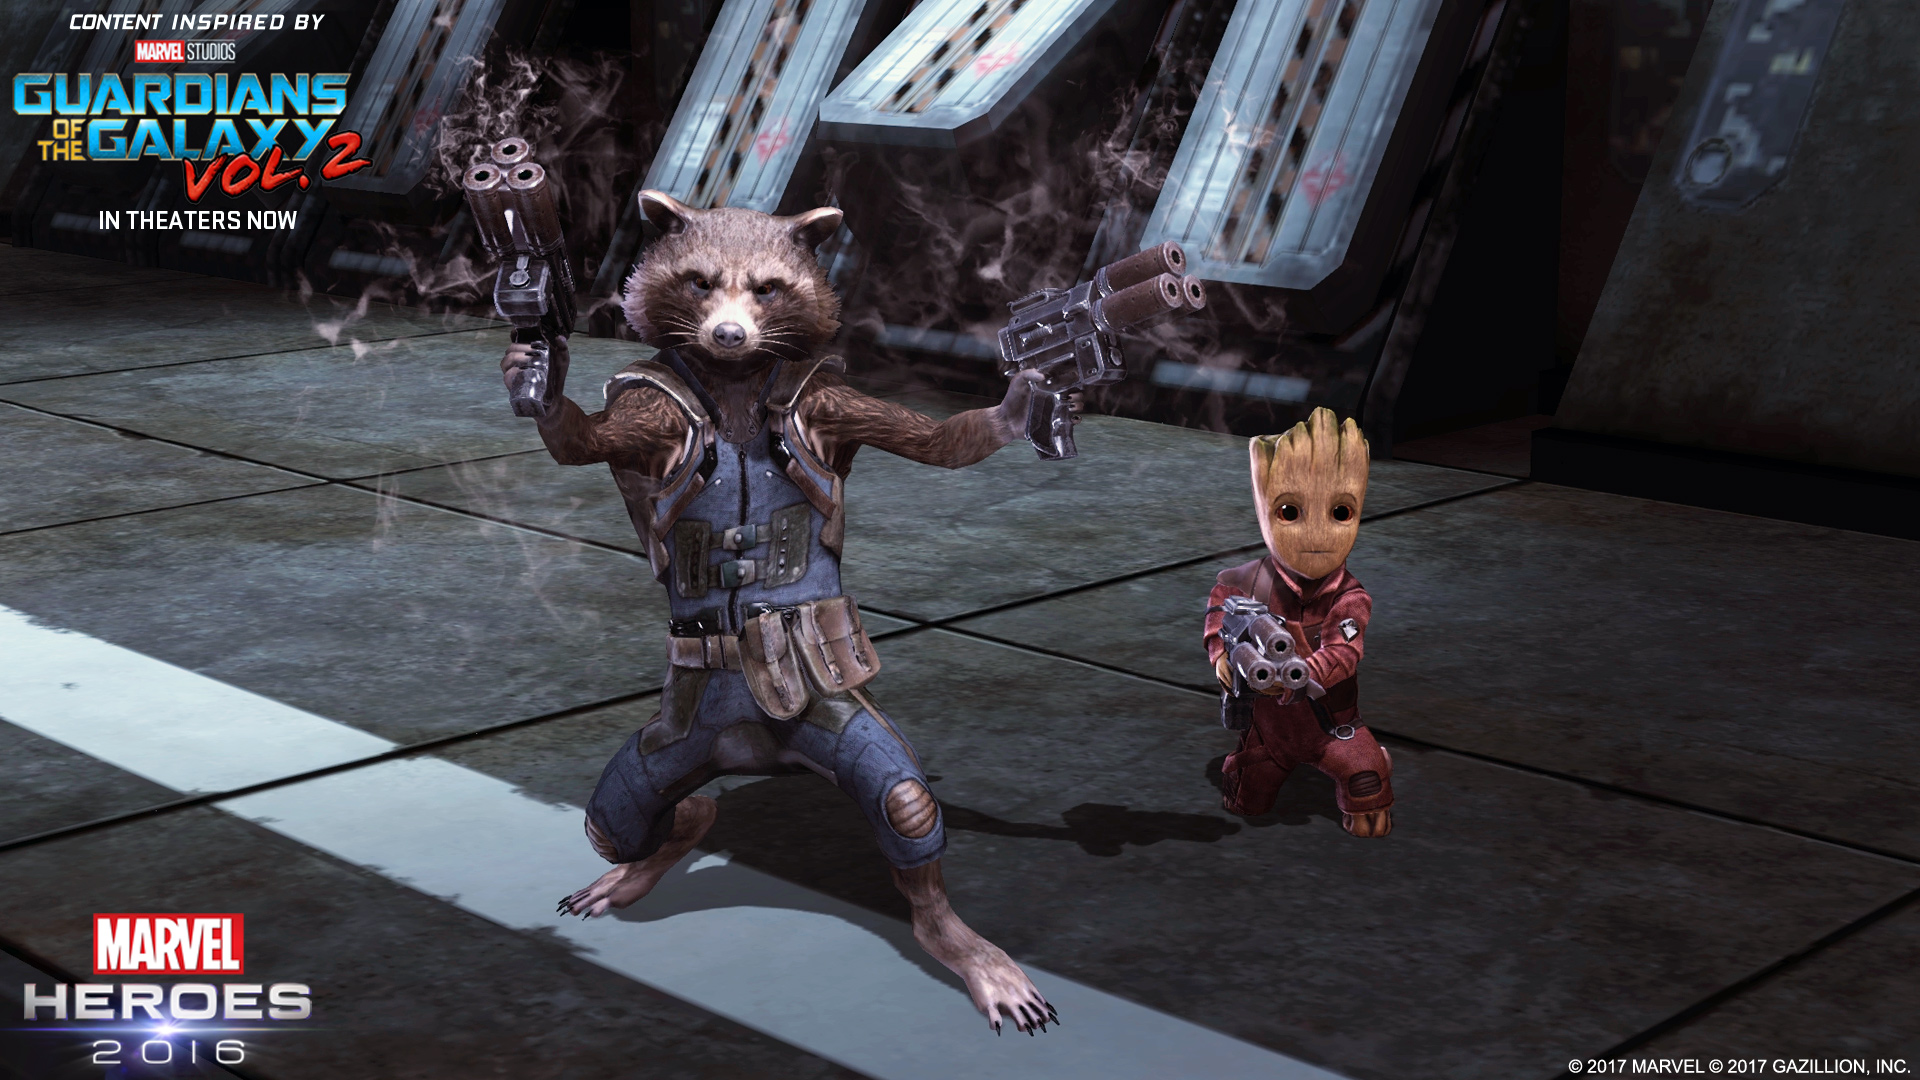 Marvel Heroes 2016 - Marvel's Guardians of the Galaxy Vol. 2 Pack screenshot